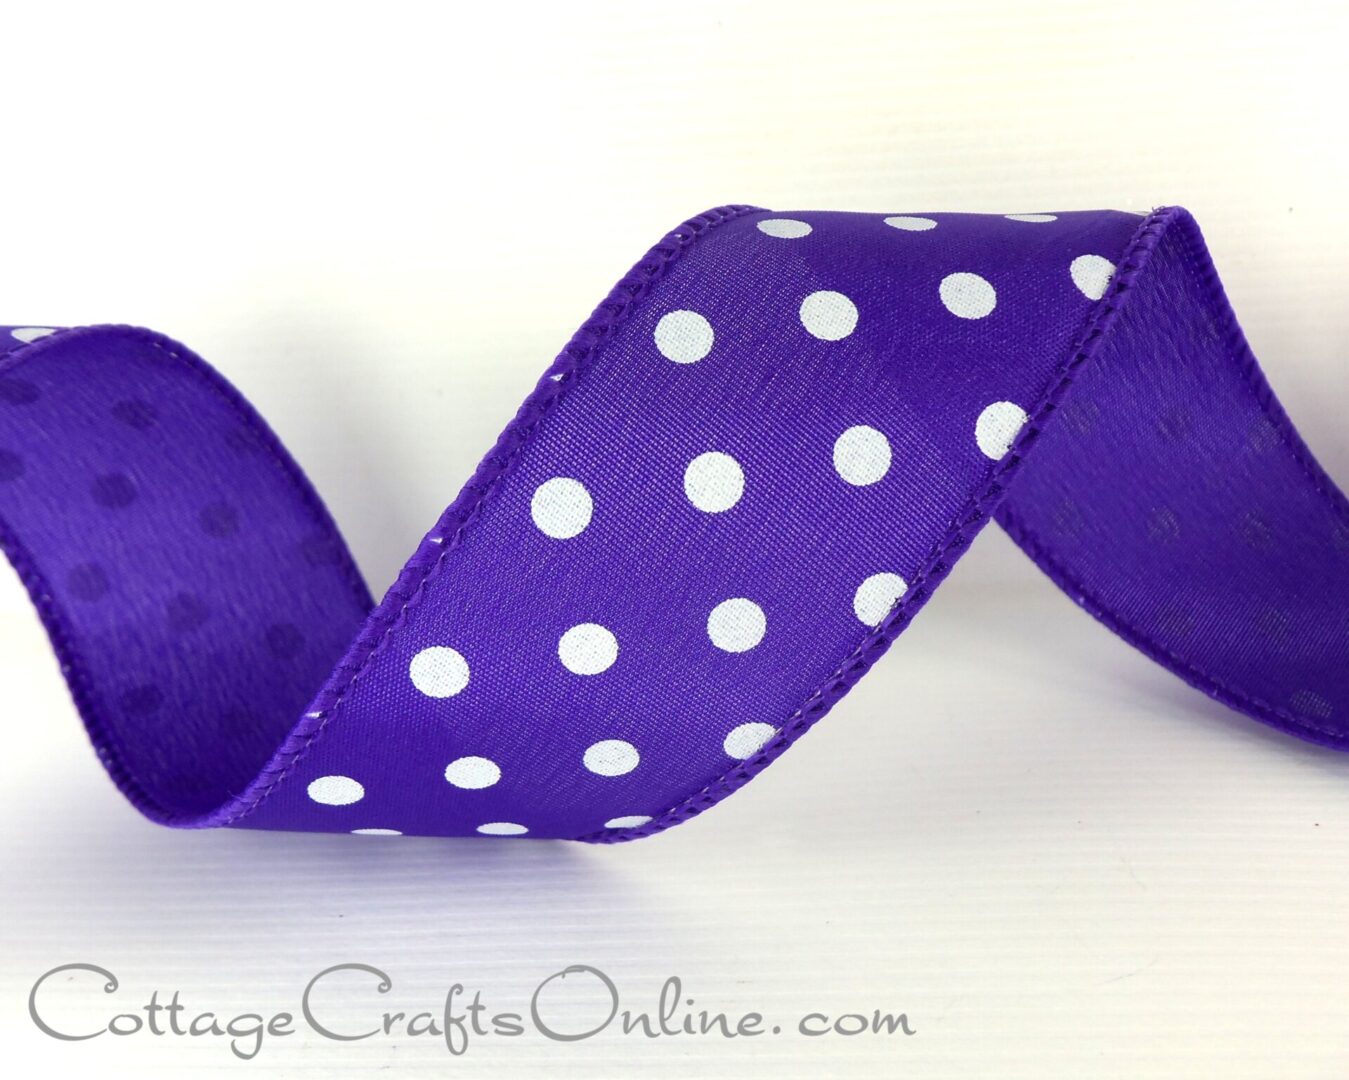 White polka dots on bright purple 2.5" wide wired ribbon from the Etsy shop of Cottage Crafts Online.